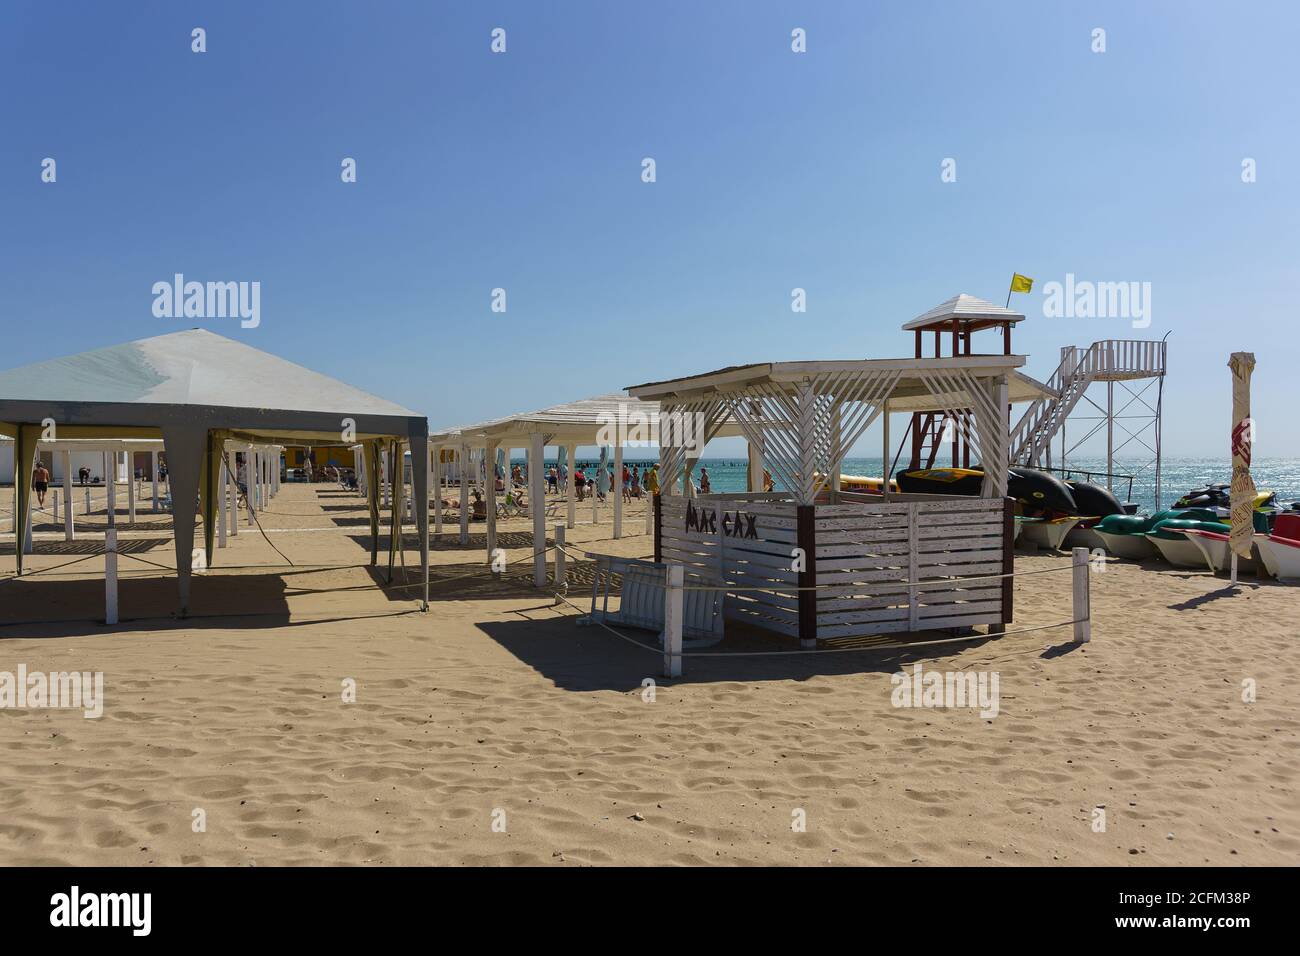 Yevpatria, Crimea, Russia-September 12, 2019: Shadow visits on the sandy beach 'Novy' in the resort town. Russian text ' Massage' Stock Photo